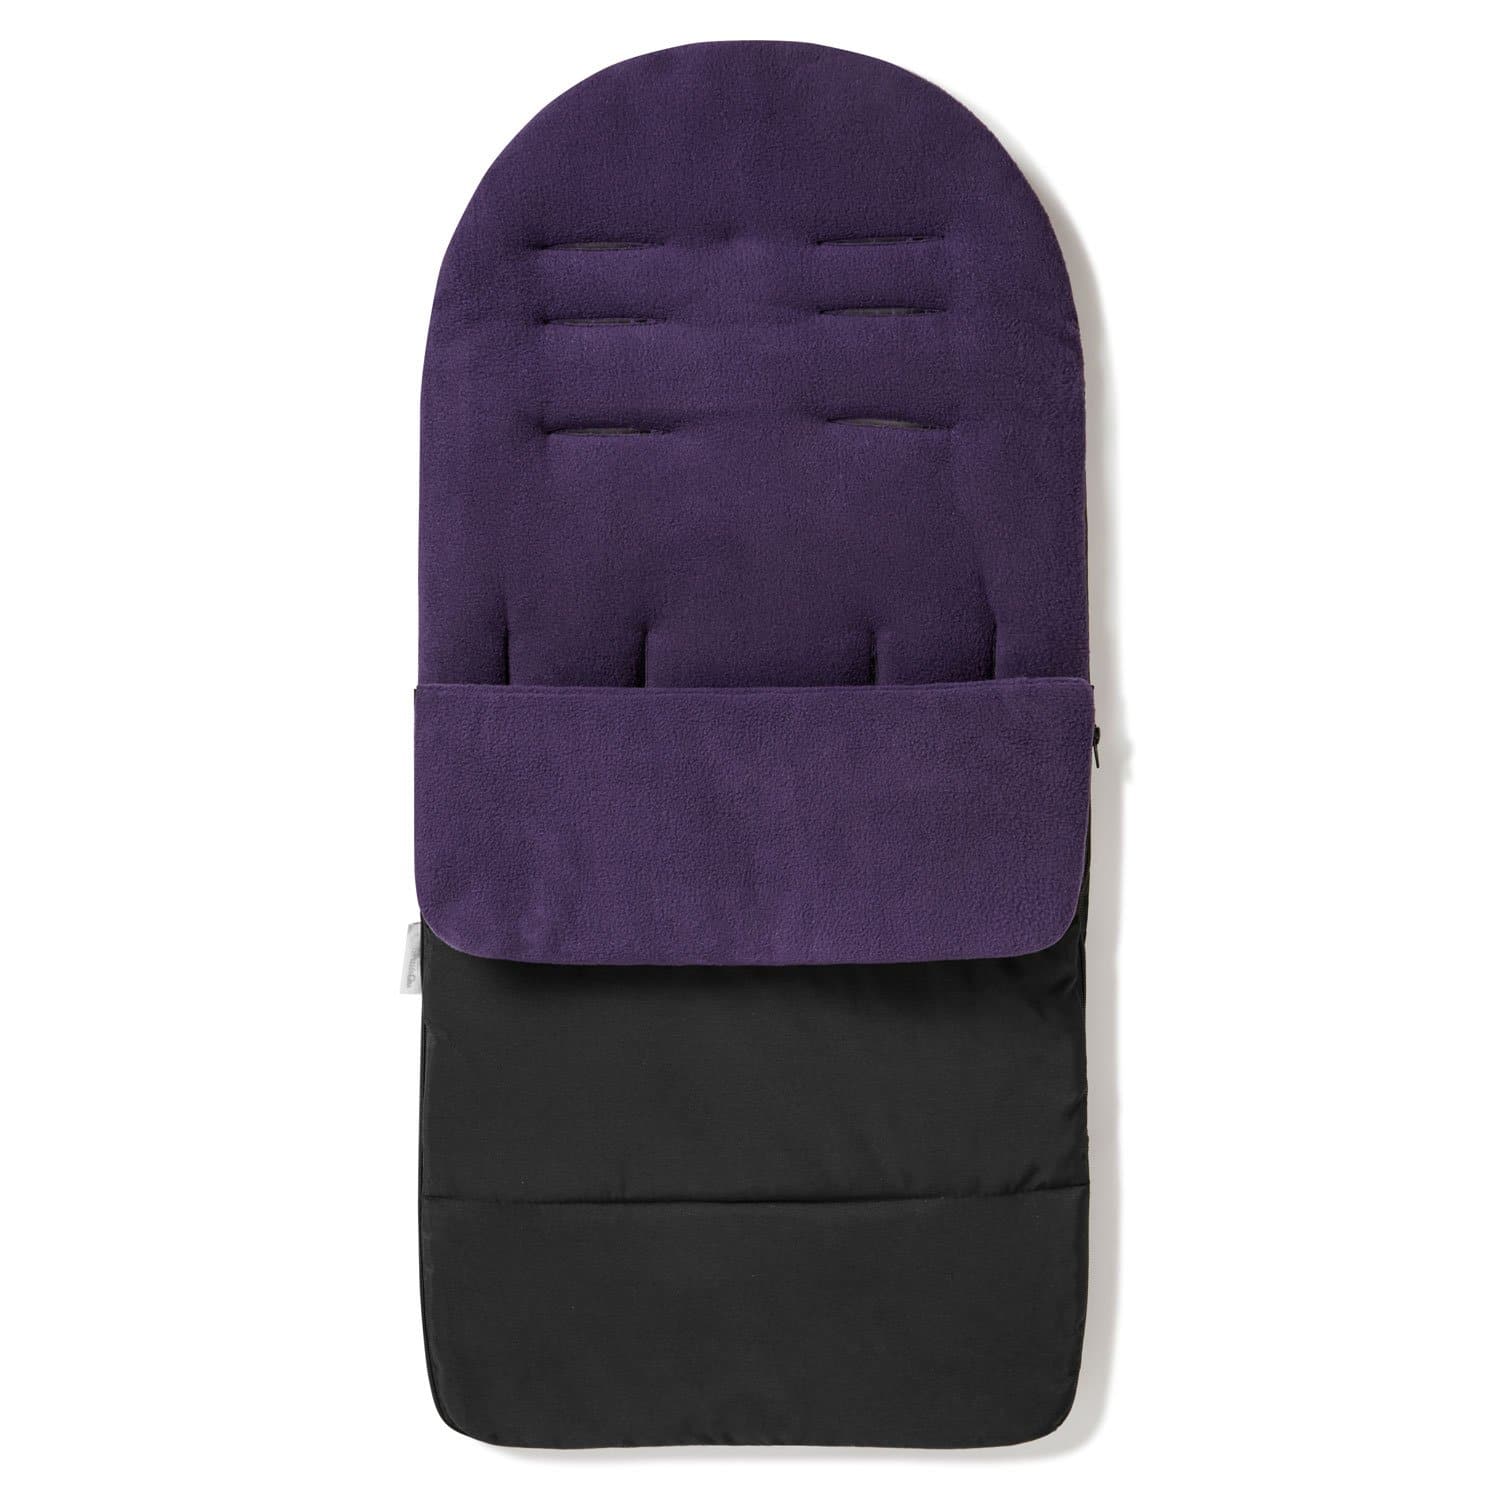 Premium Footmuff / Cosy Toes Compatible with Teutonia - Plum Purple / Fits All Models | For Your Little One